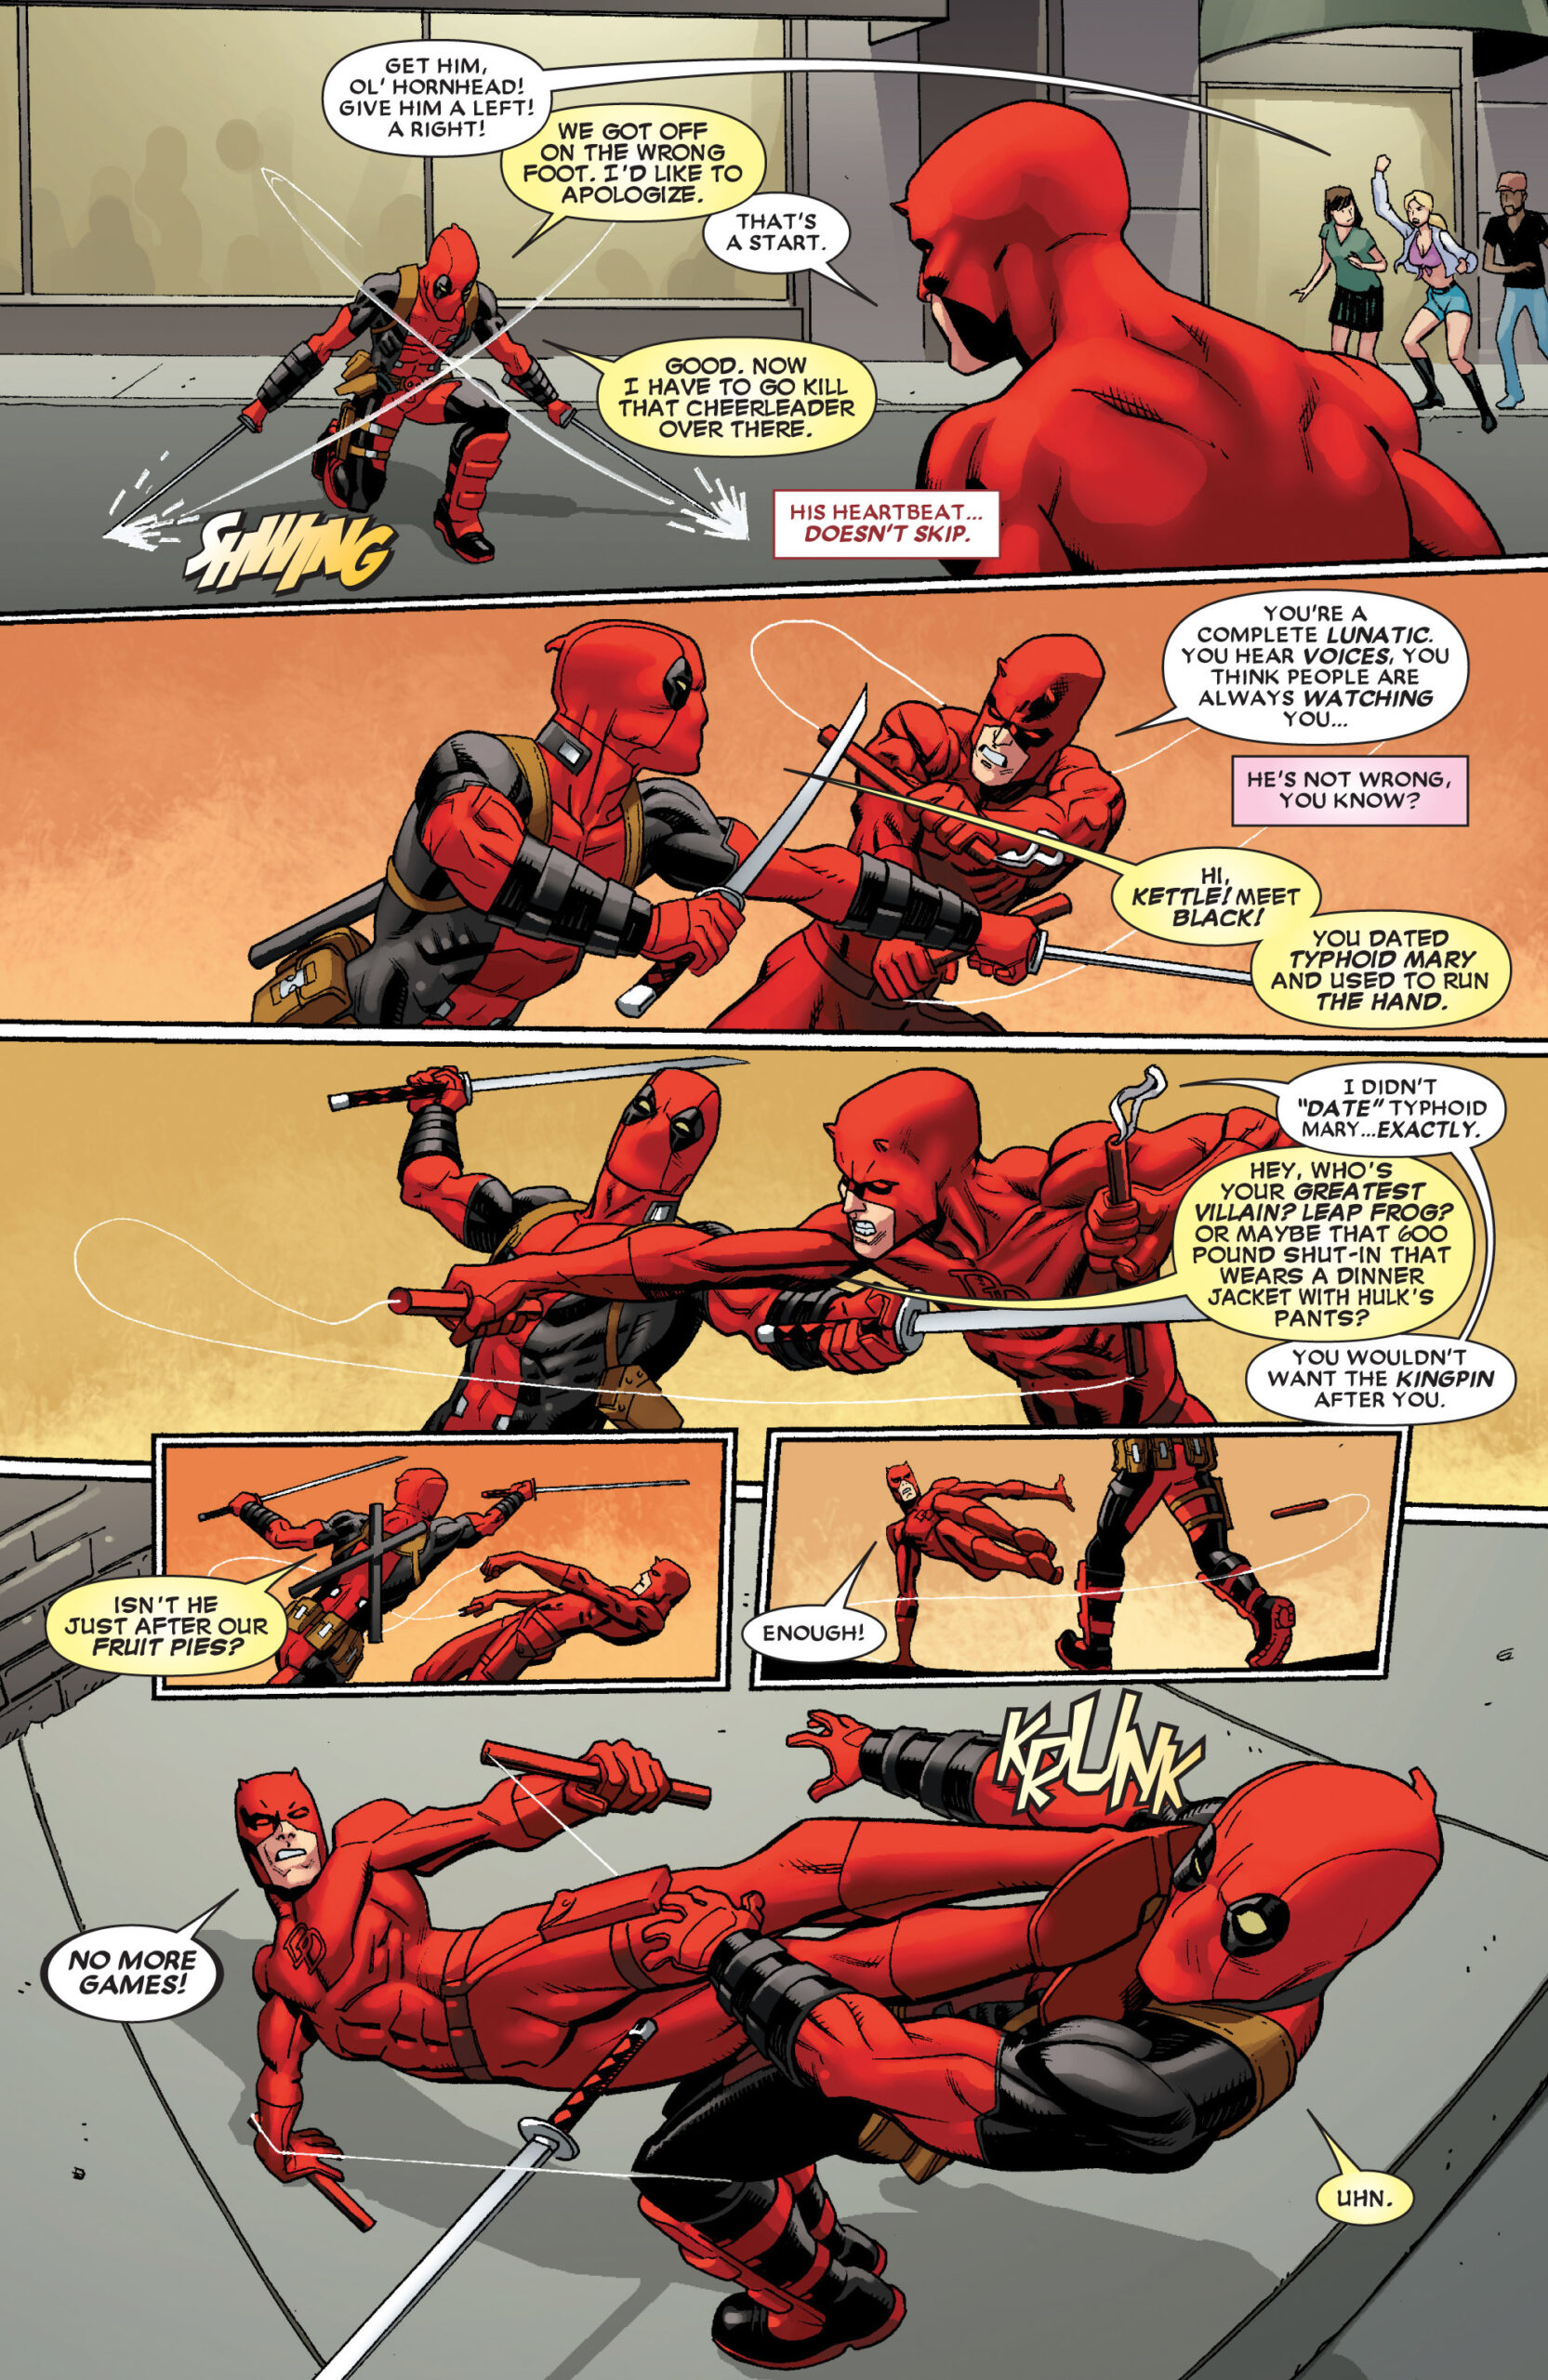 Deadpool's mission runs into an unexpected snag with Daredevil arrives on the scene in Deadpool Vol. 5 #11 (2013), Marvel Comics. Words by Brian Posehn and Gerry Duggan, art by Mike Hawthorne, Val Staples, and Joe Sabino via digital issue